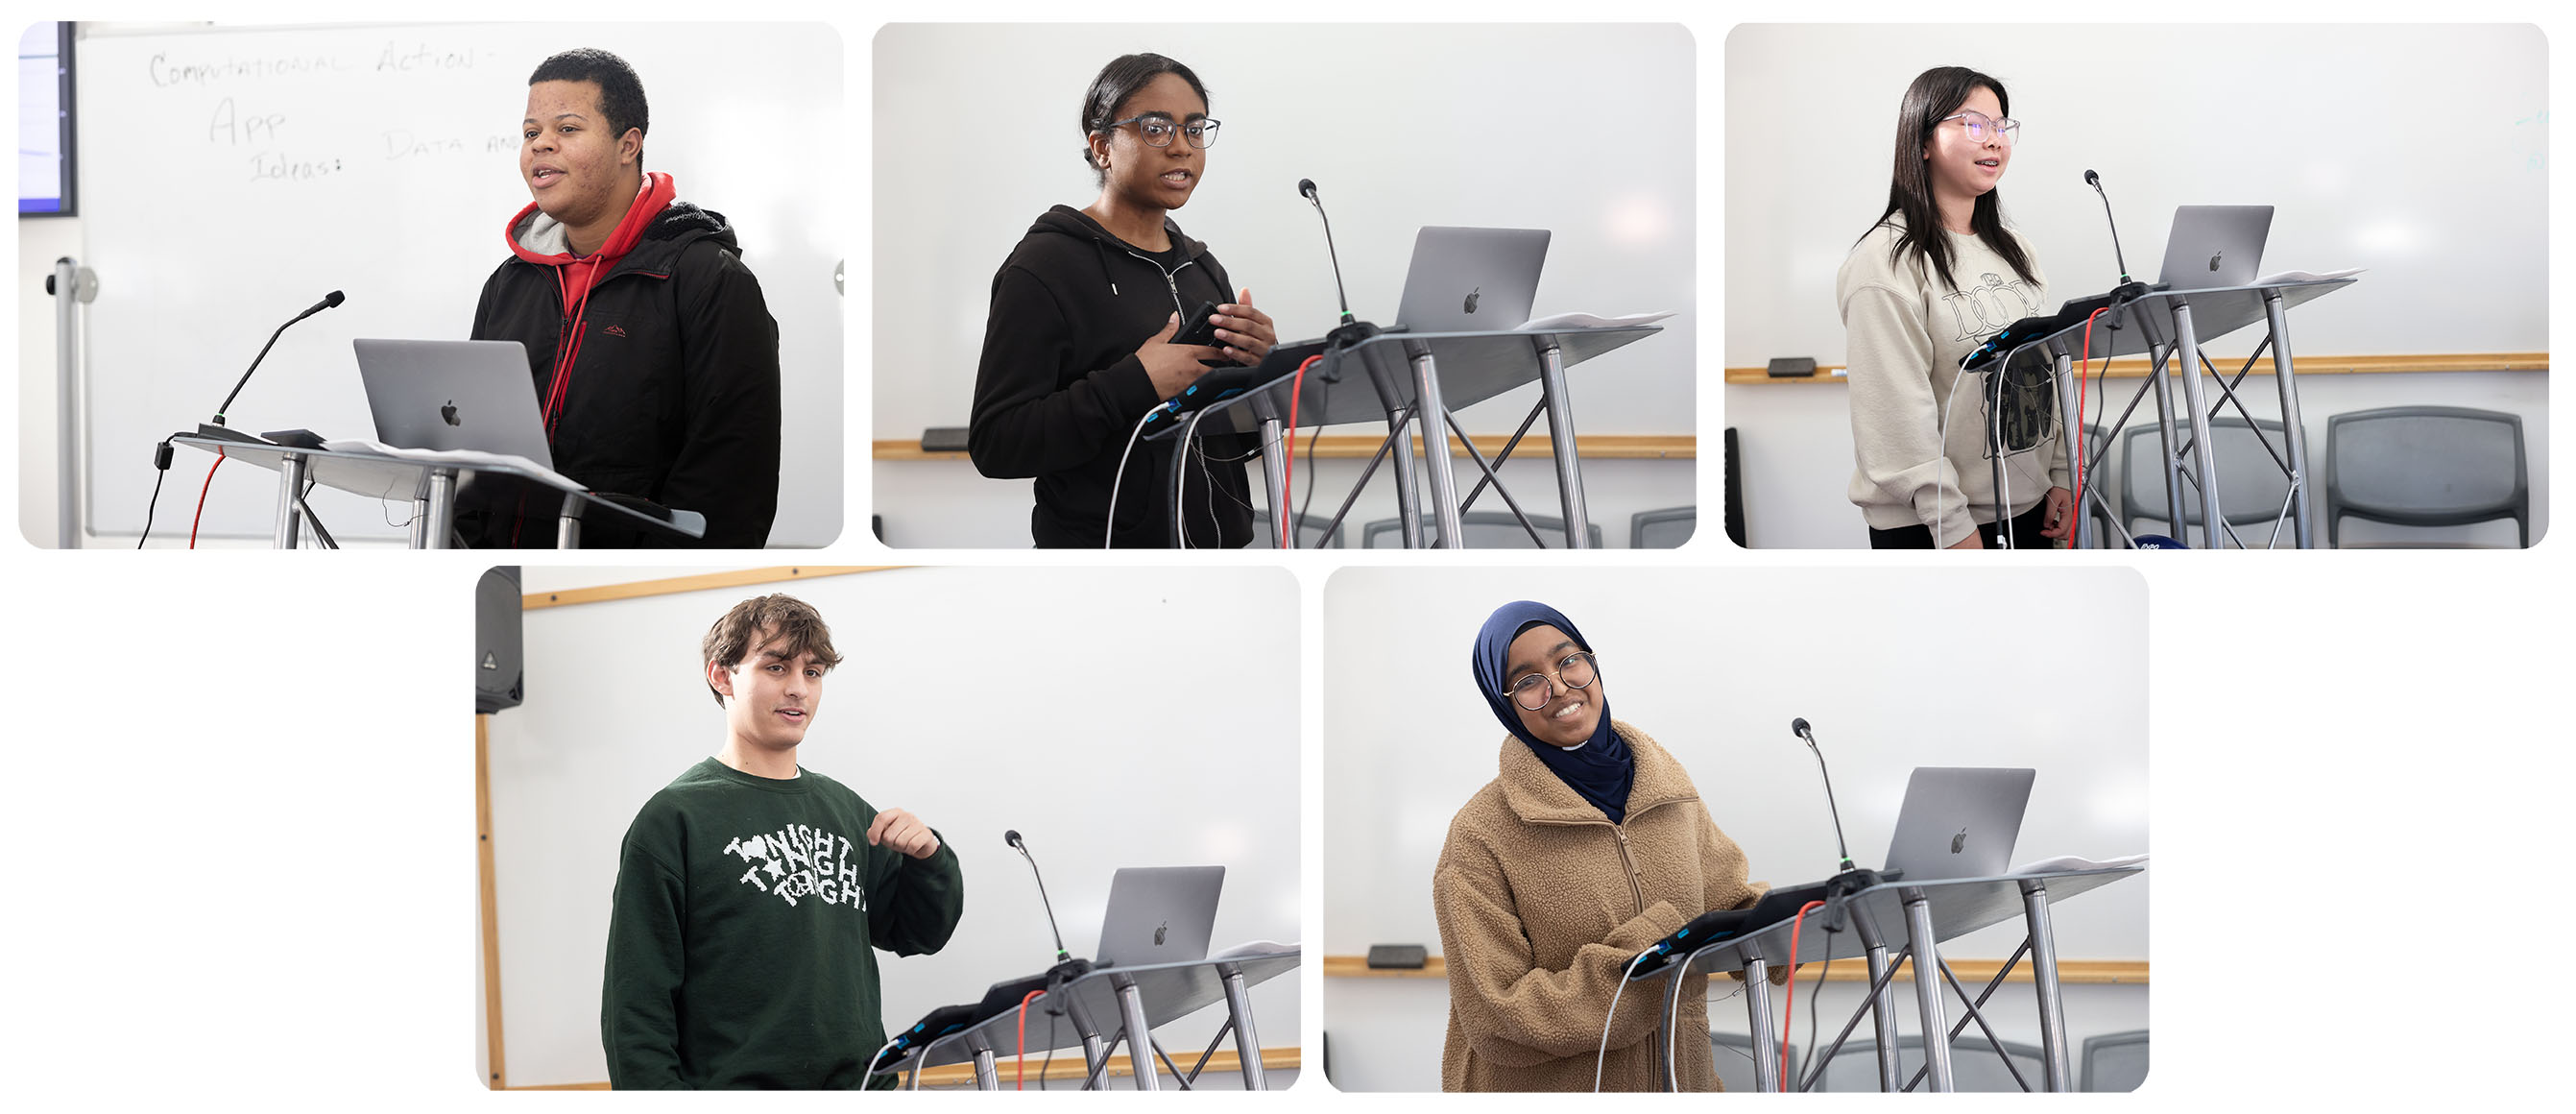 The workshop culminated in team presentations. Each student team shared a design idea for an app incorporating AI and data science.